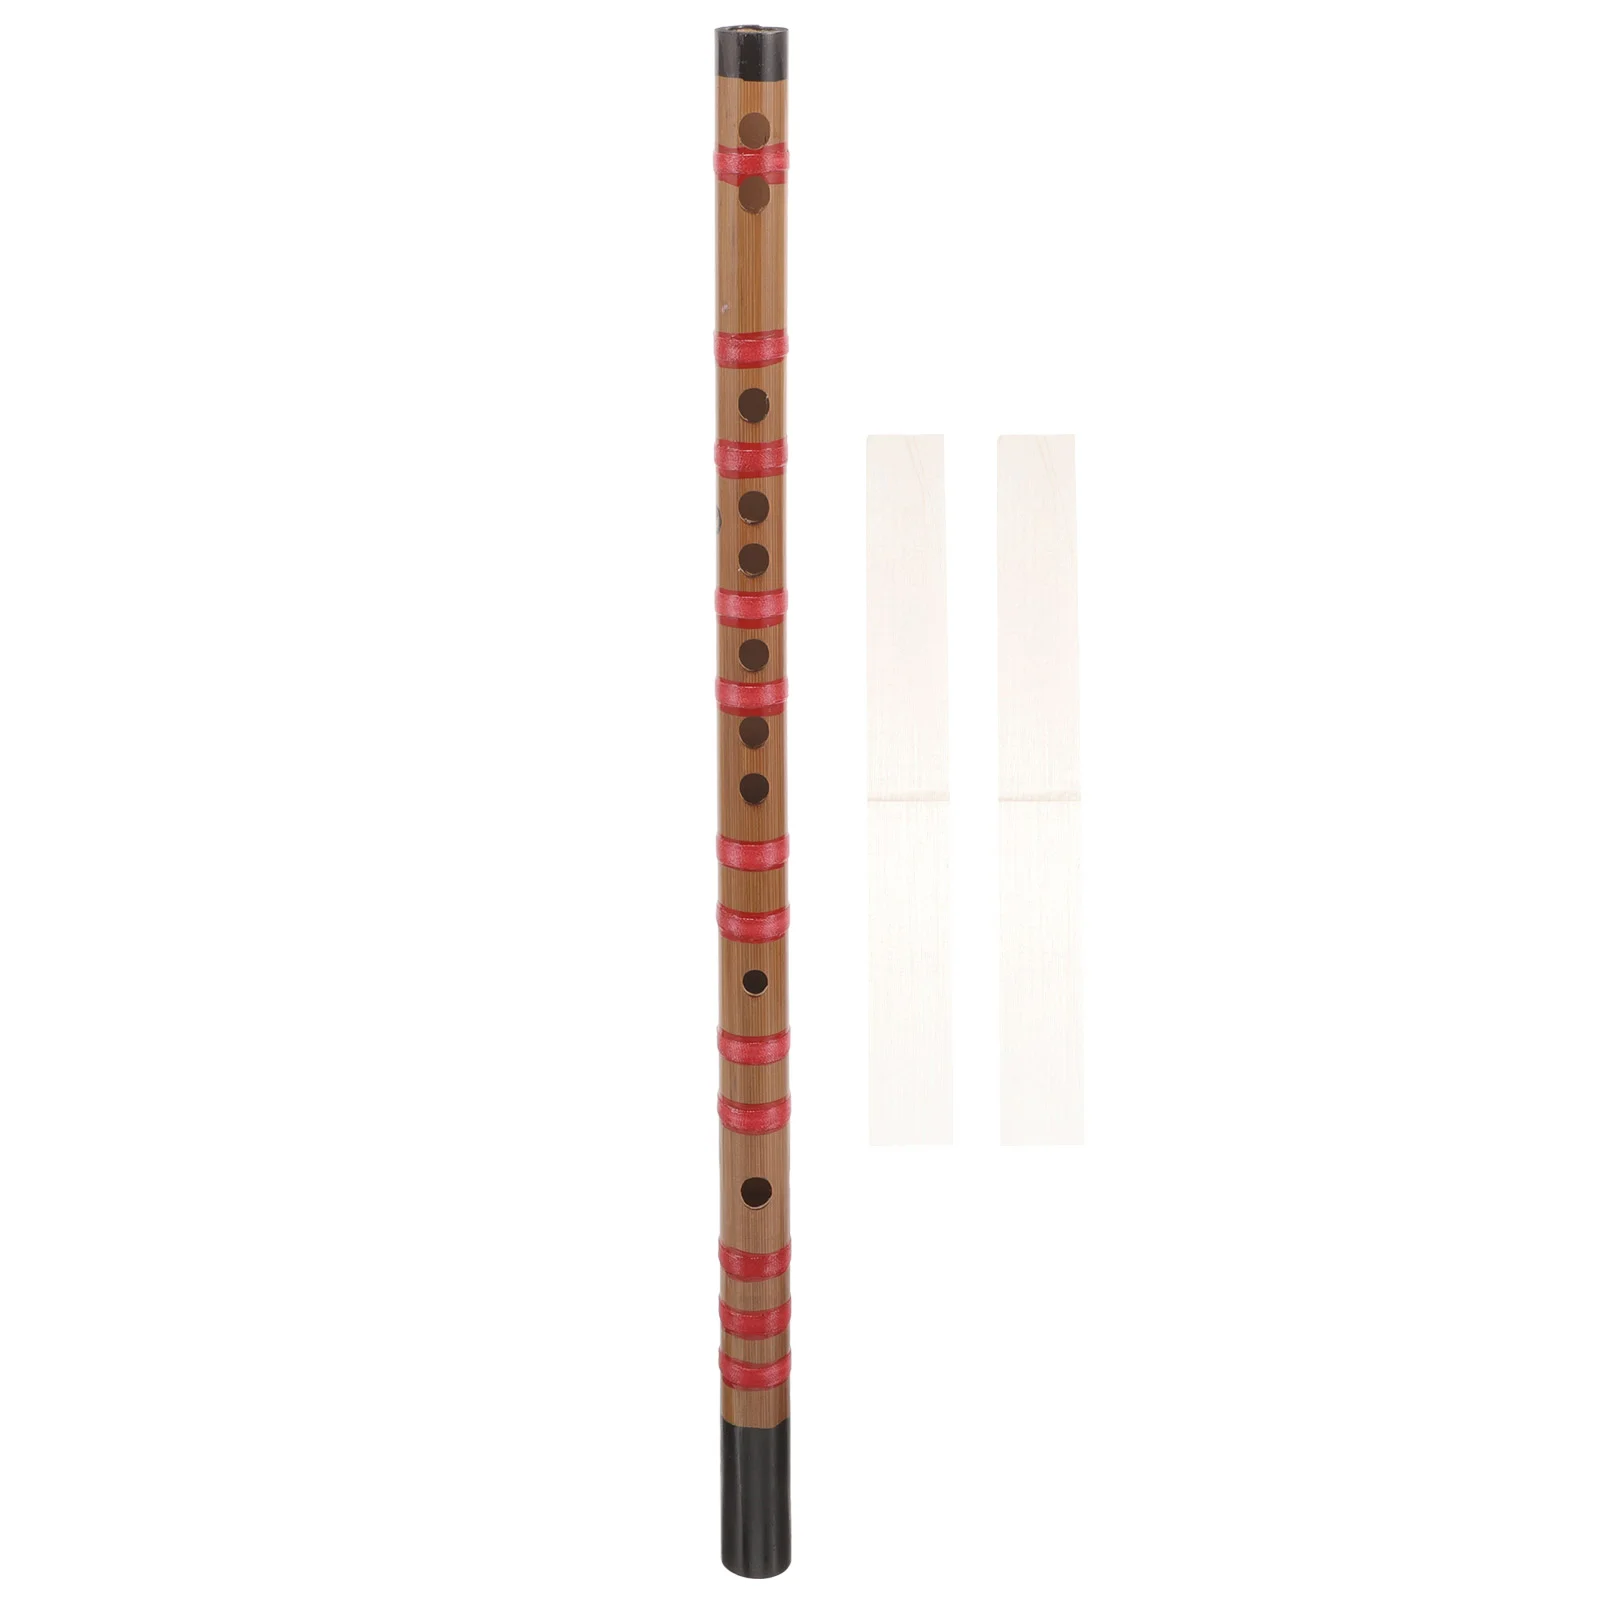 

Bamboo Flute Traditional Beginner Chinese Music Instrument Flutes for Beginners Musical Student